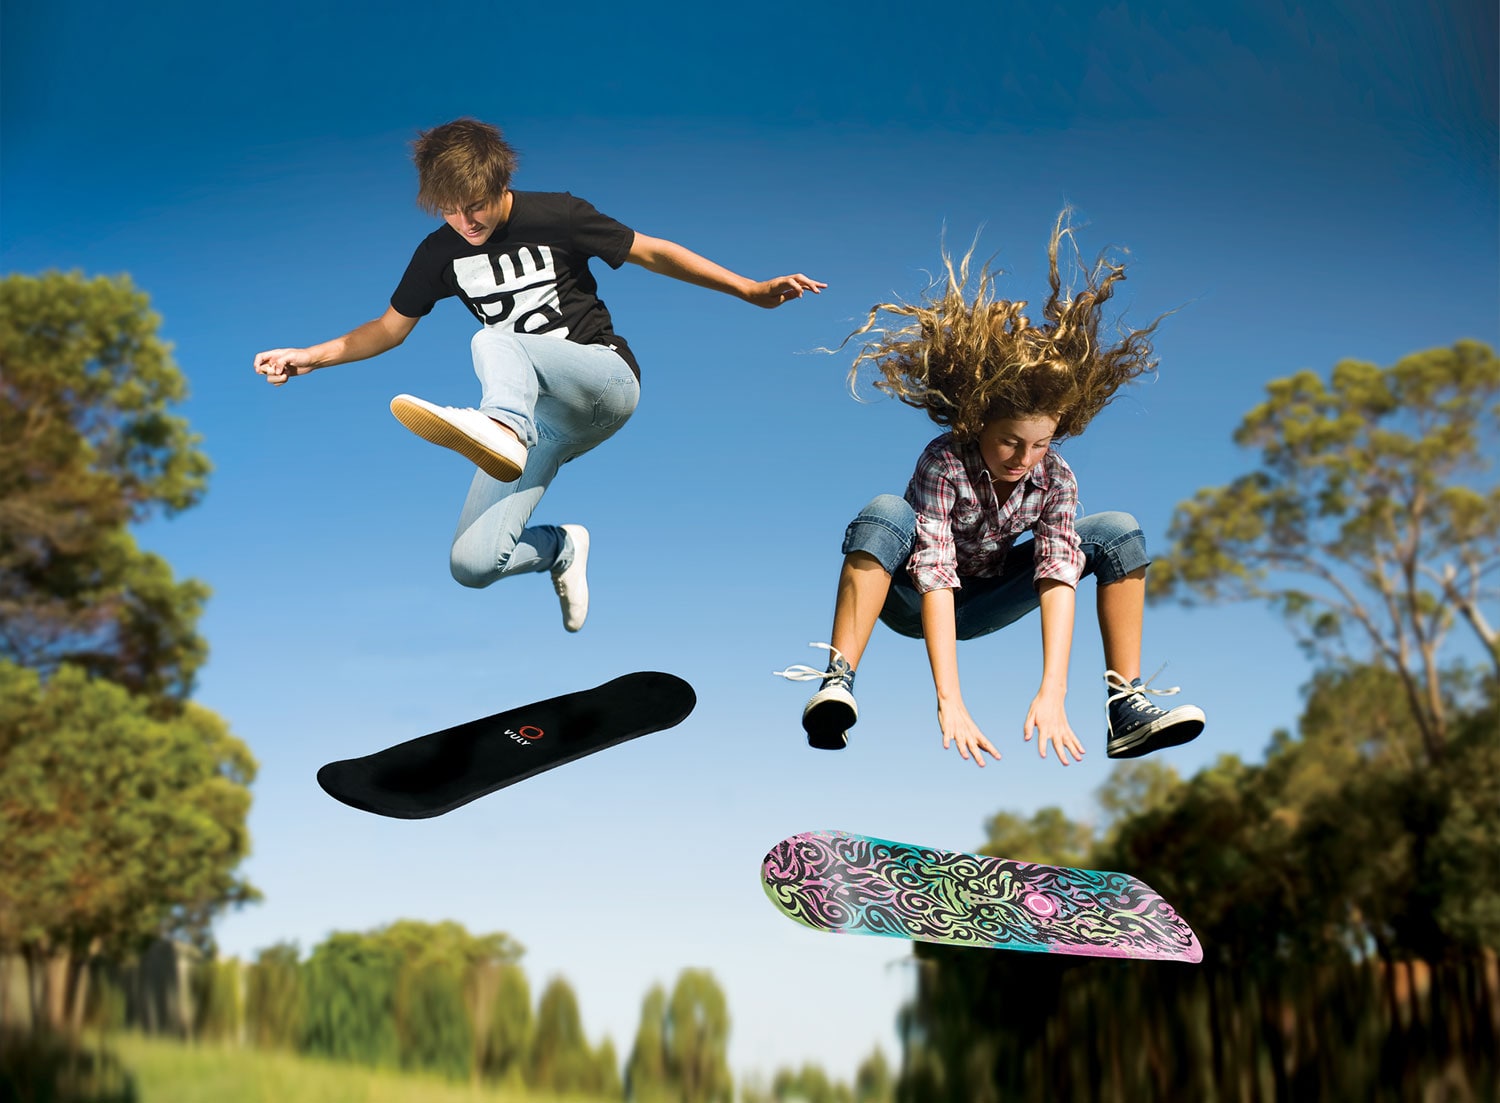 Try out all the skateboarding techniques from the safety of your Vuly trampoline.